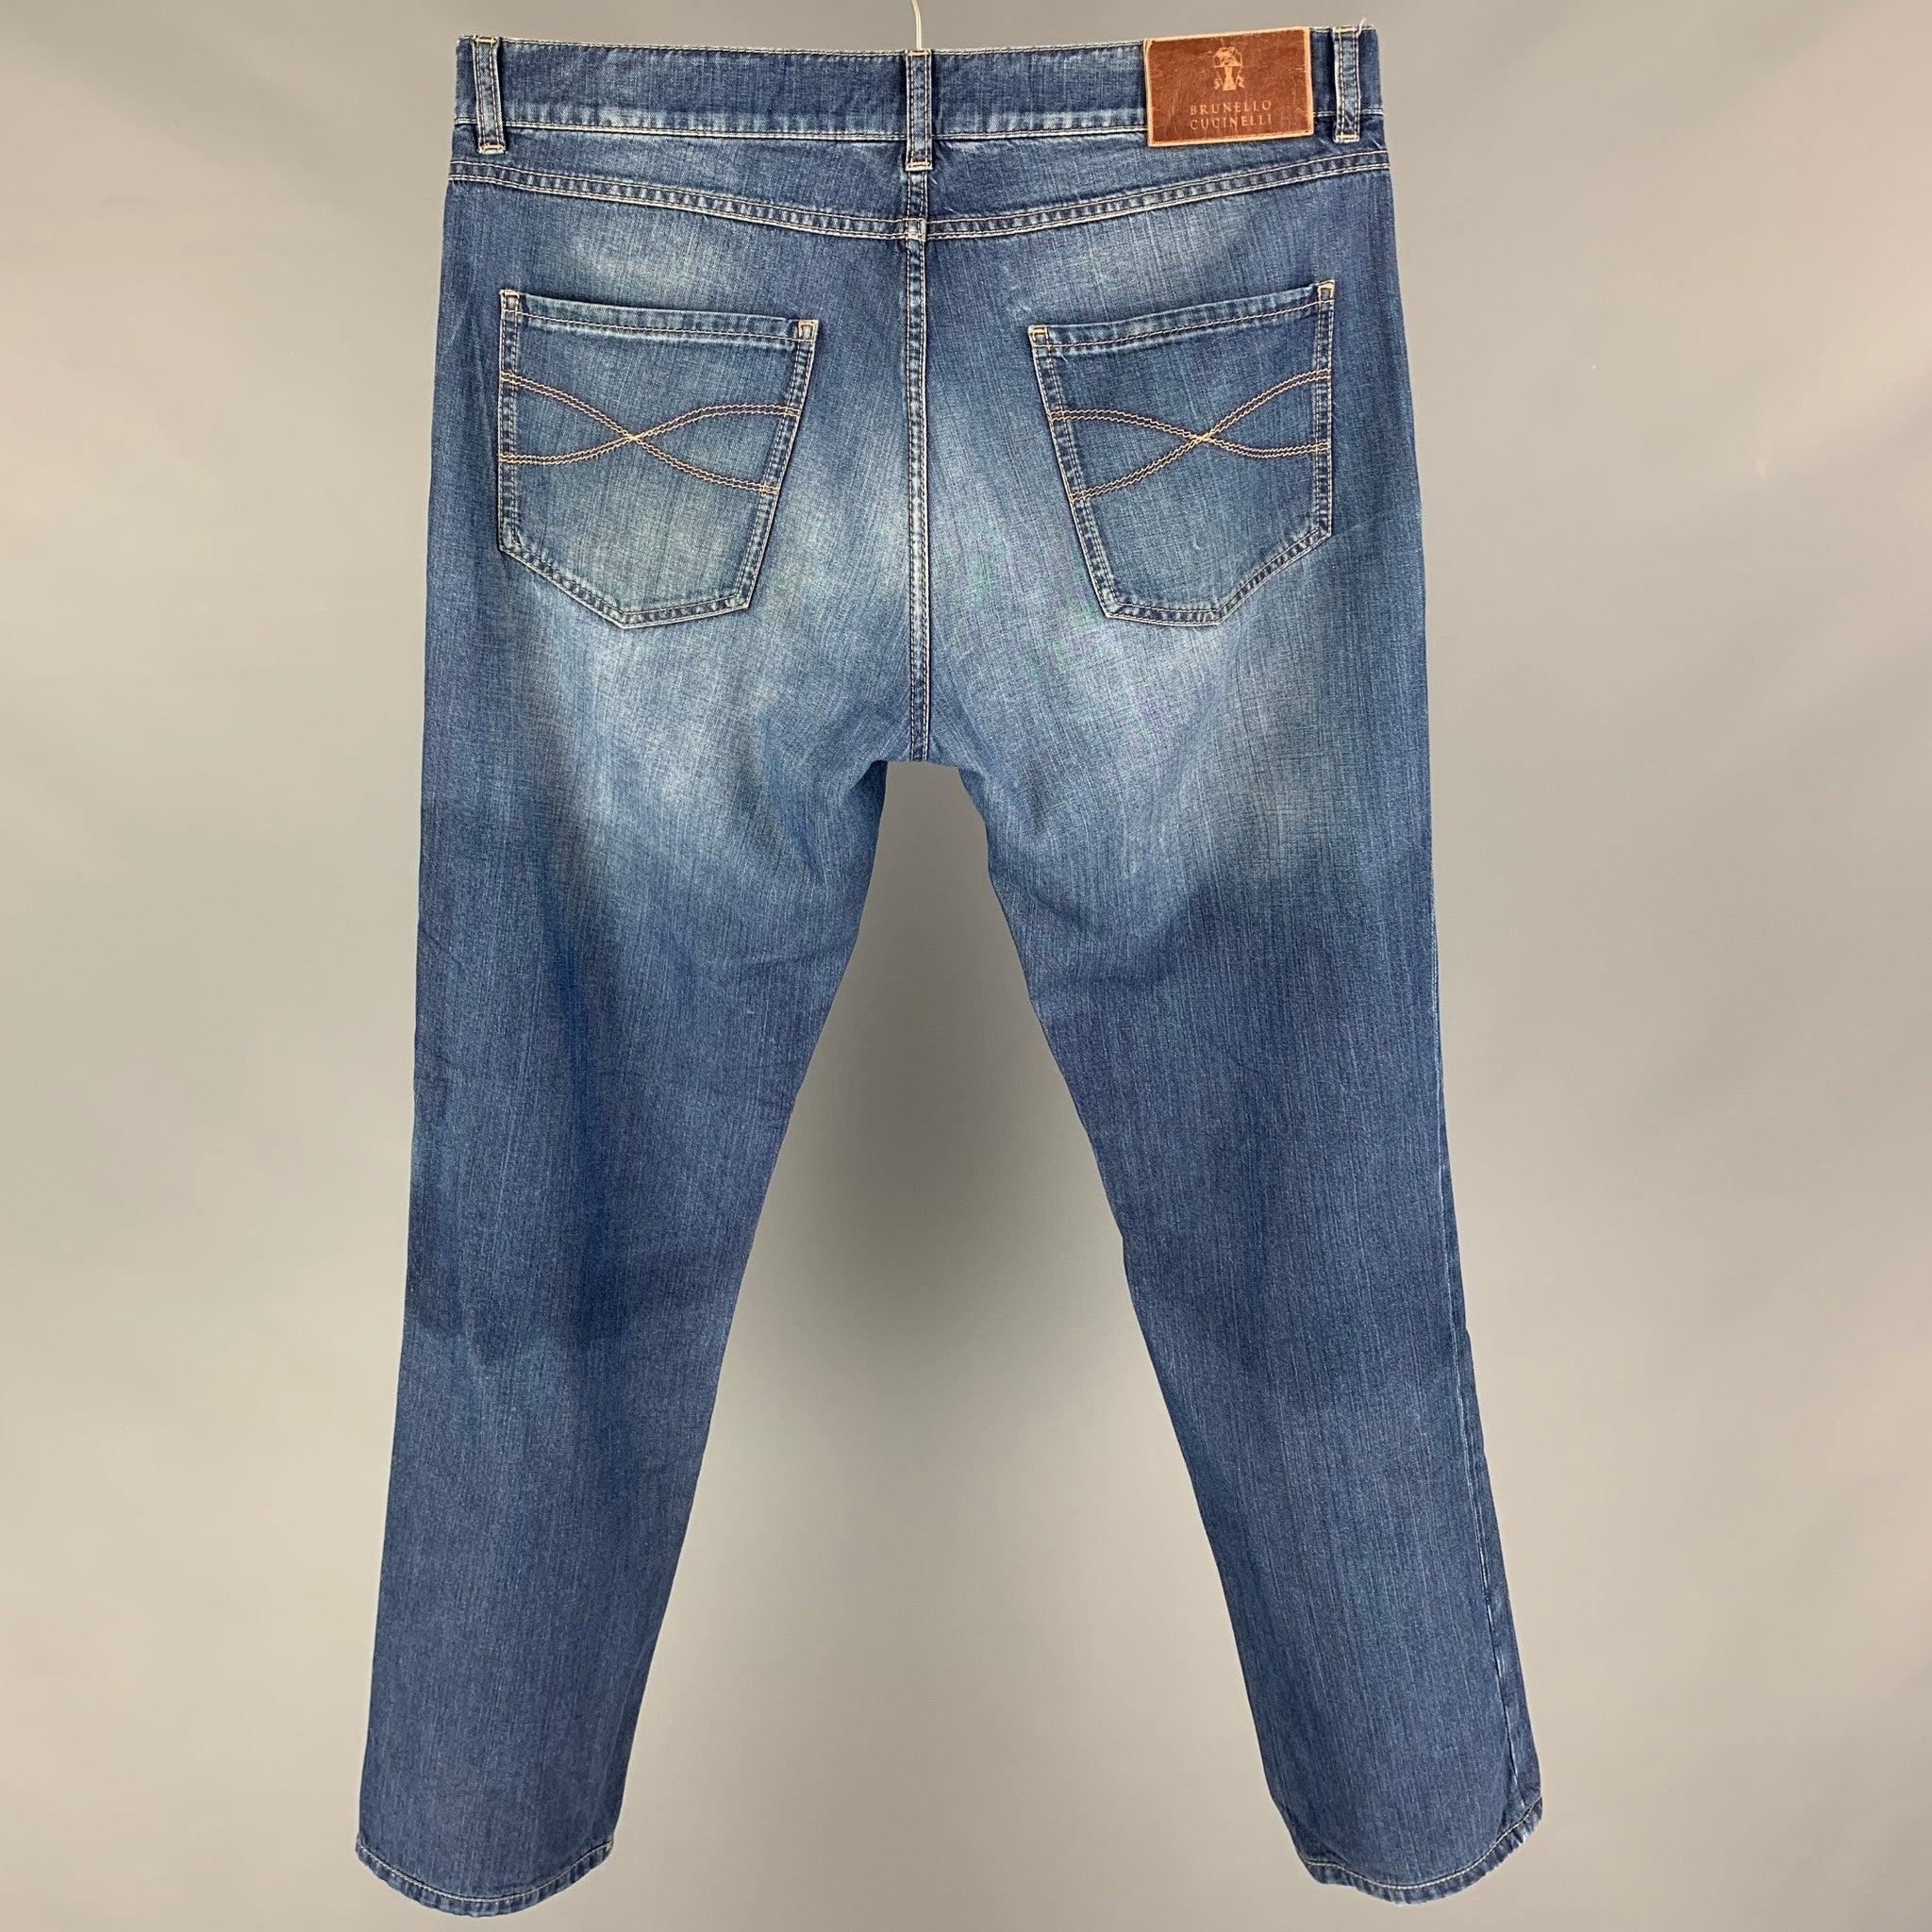 BRUNELLO CUCINELLI Size 34 Blue Washed Cotton Button Fly Jeans In Good Condition For Sale In San Francisco, CA